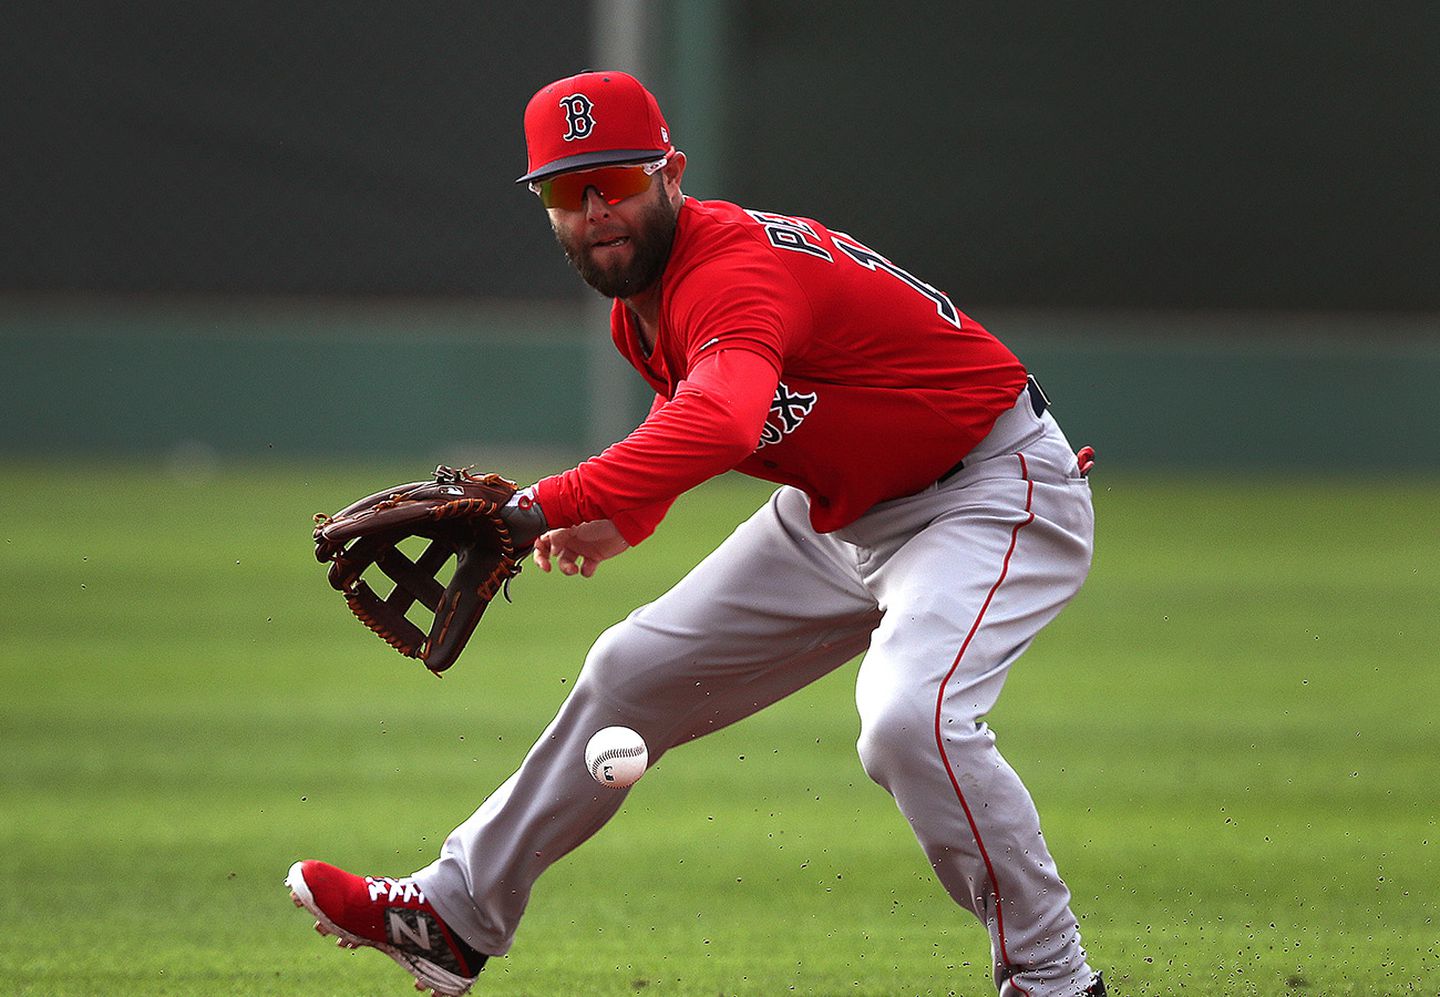 Dustin Pedroia's Gold Glove Season With Red Sox Should Be